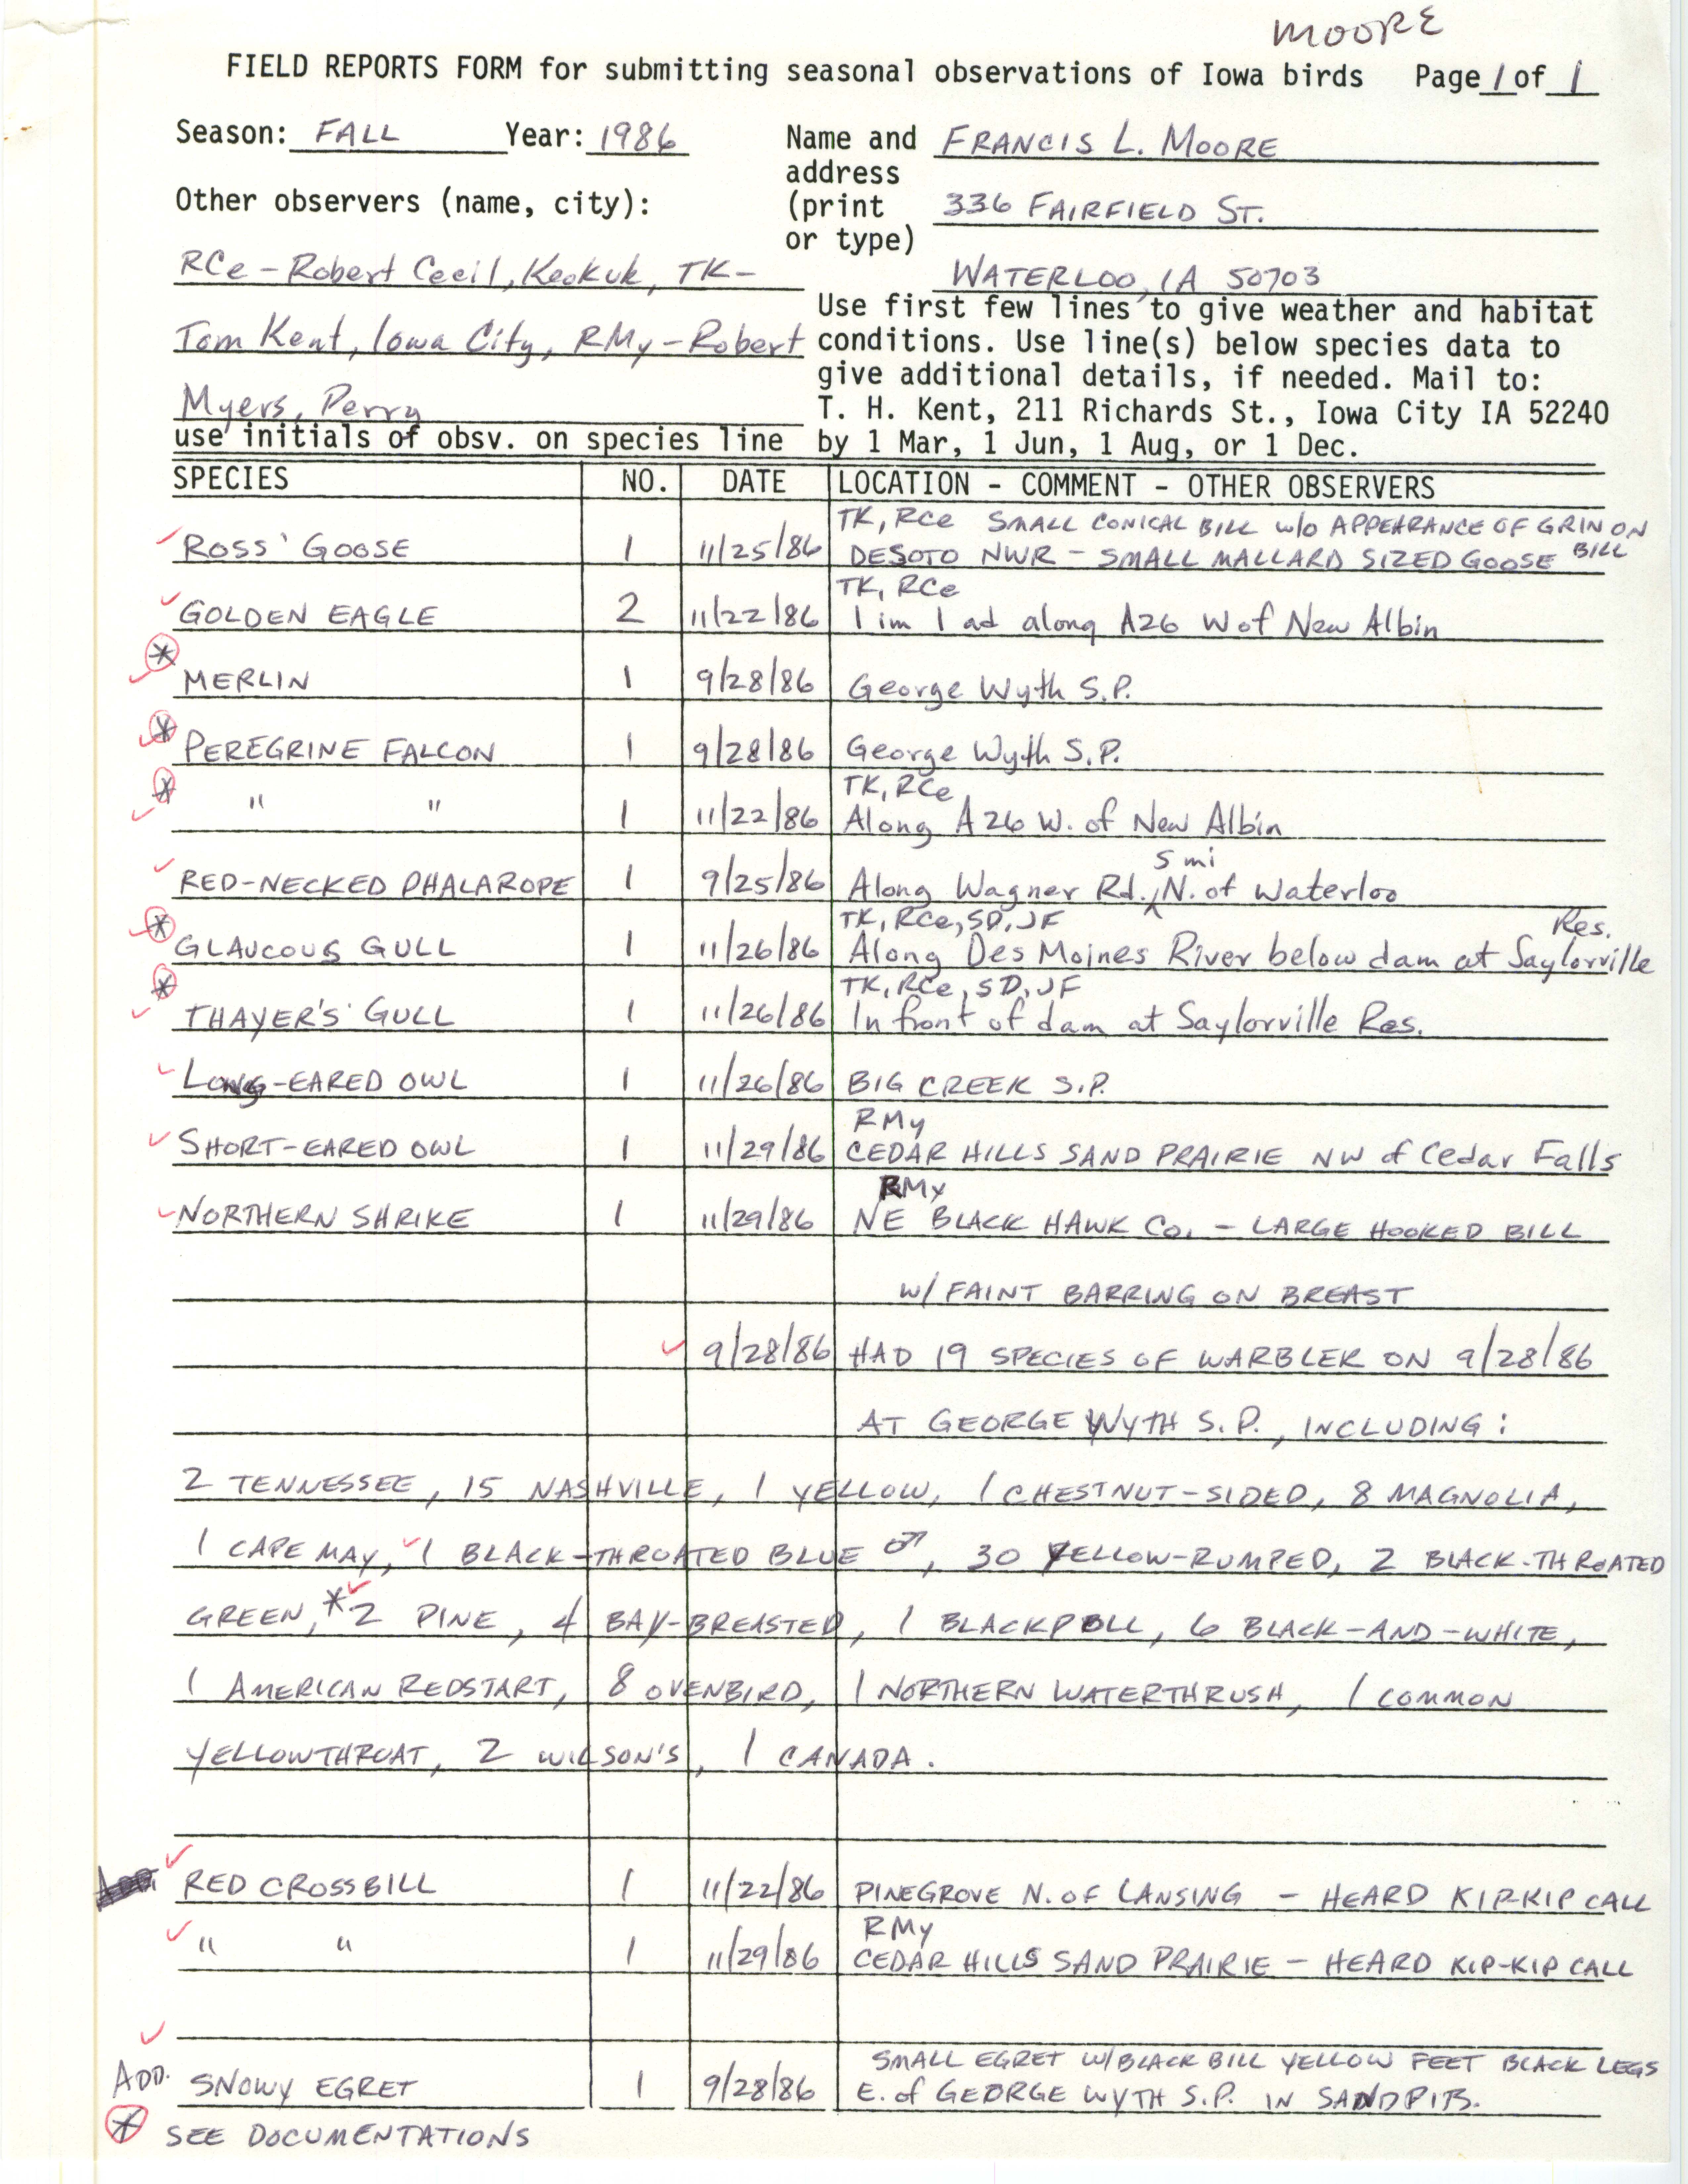 Field reports form for submitting seasonal observations of Iowa birds, Francis L. Moore, fall 1986